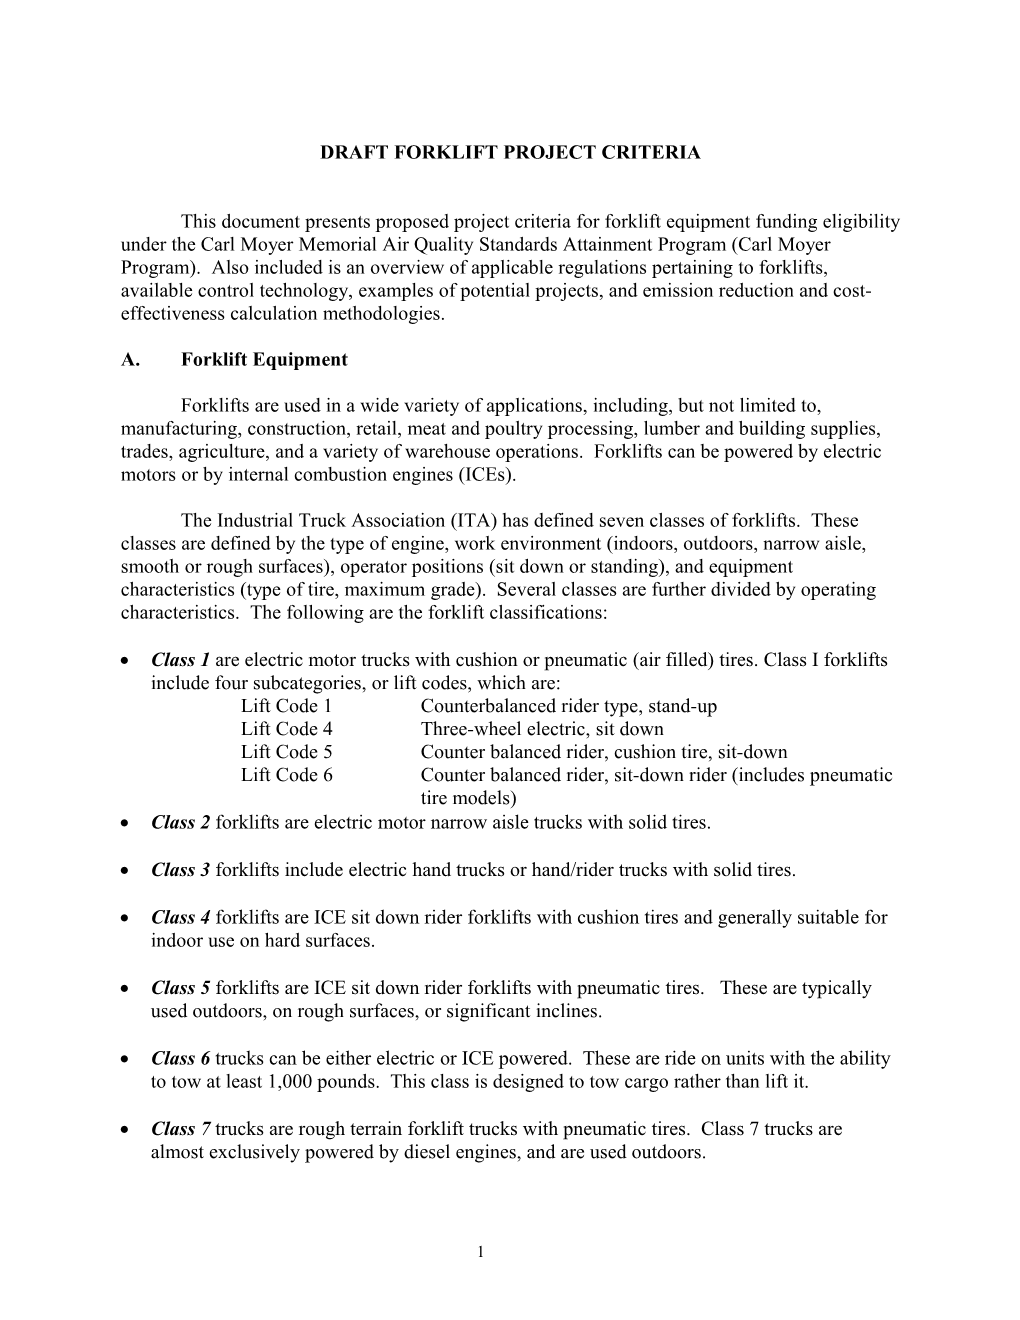 Draft Forklift Project Criteria